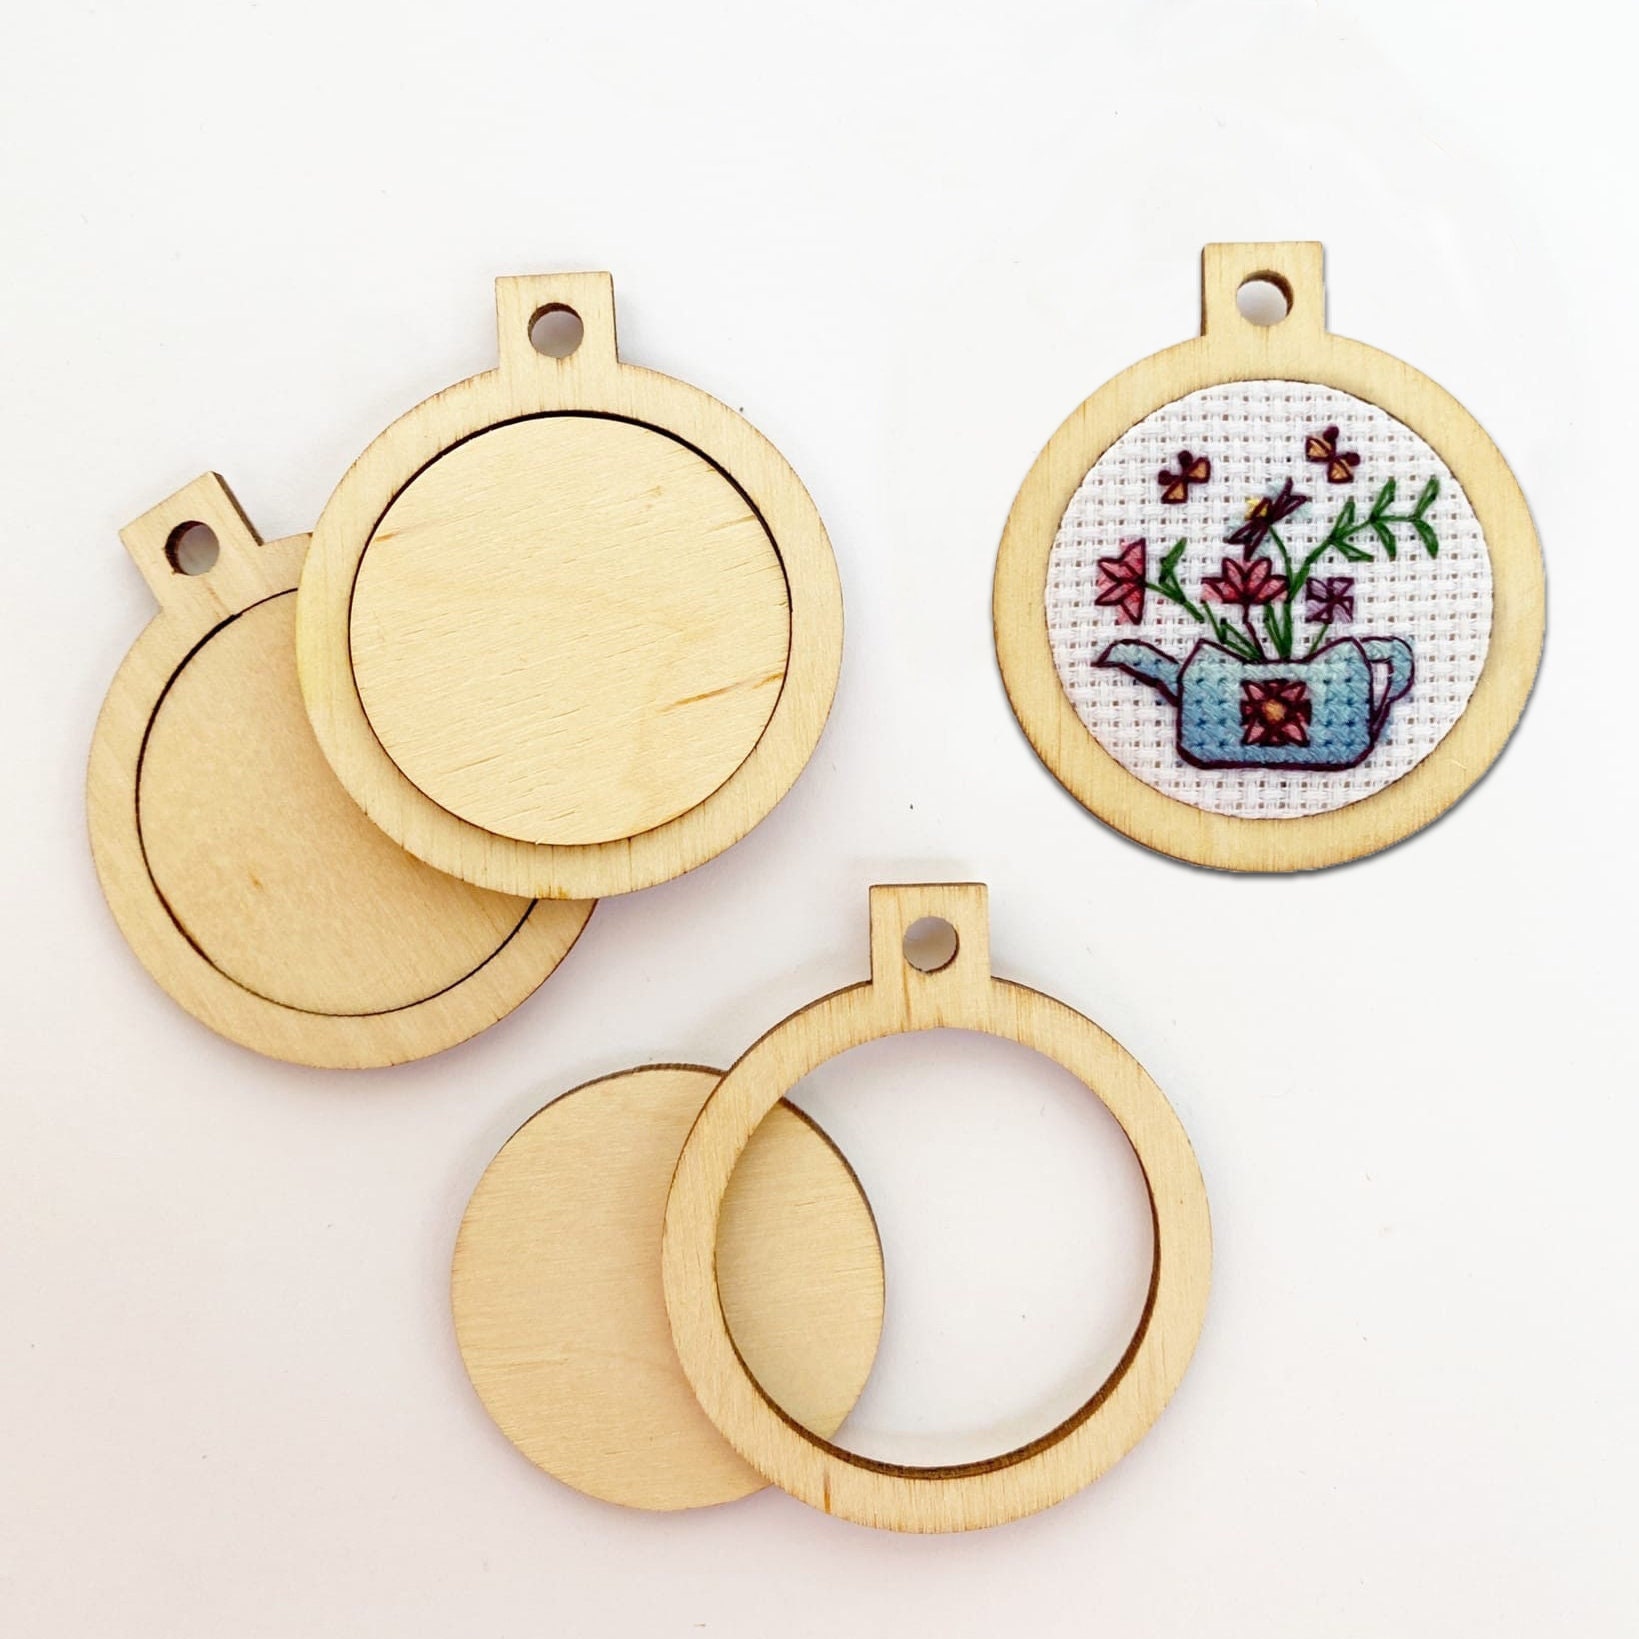 DIY Tiny Embroidery Hoop Frame Kit - 27mm x 45mm - Embroidery Hoop Frame -  Oval Miniature Embroidery Hoop - Necklace Mini Oval Hoop - Brooch